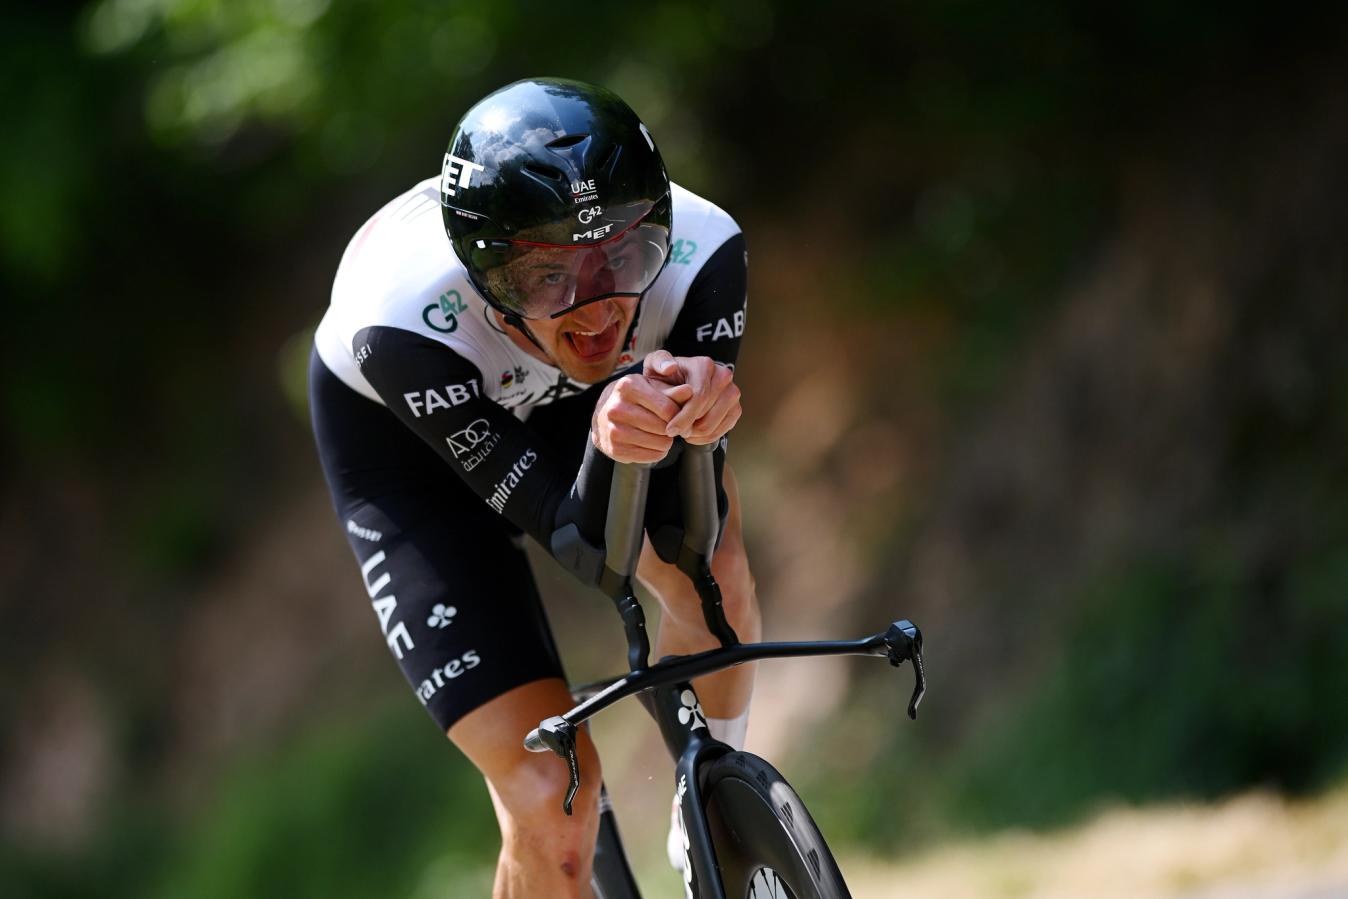 Mikkel Bjerg's first professional victory came in the stage 4 time trial of last year's Critérium du Dauphiné